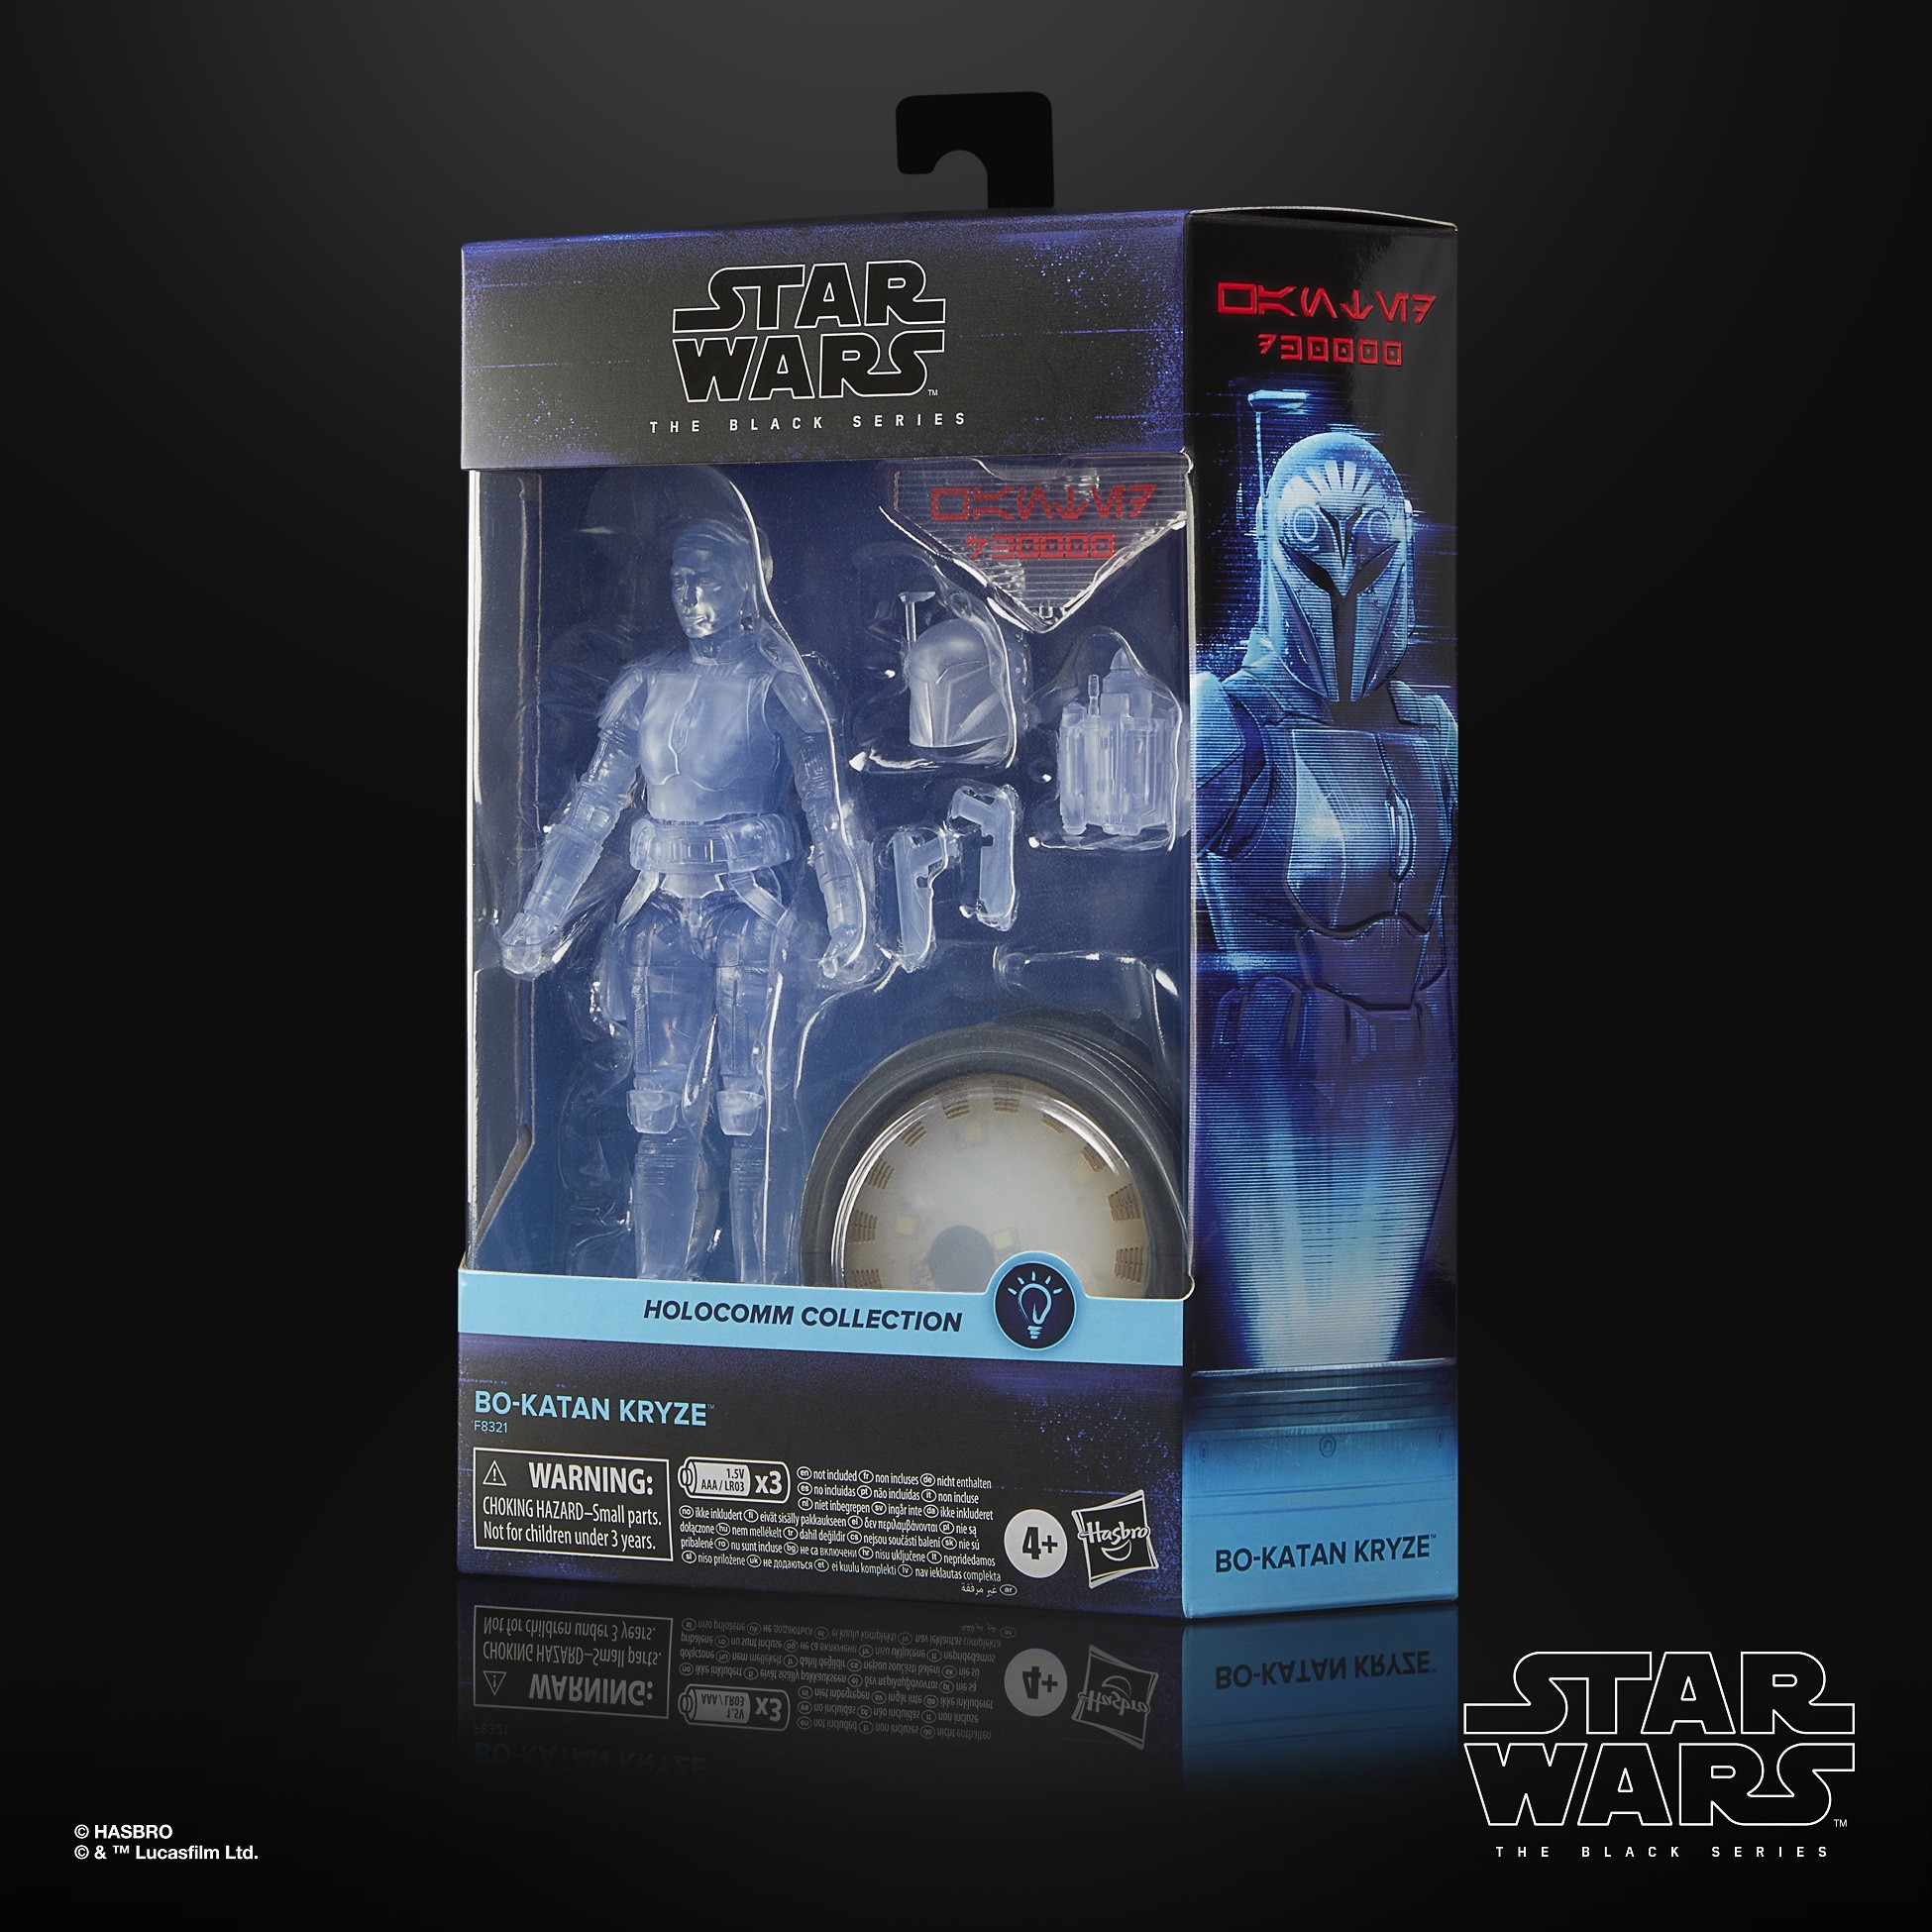 New Star Wars Toy Reveal From Hasbro Will Make Any Action Figure